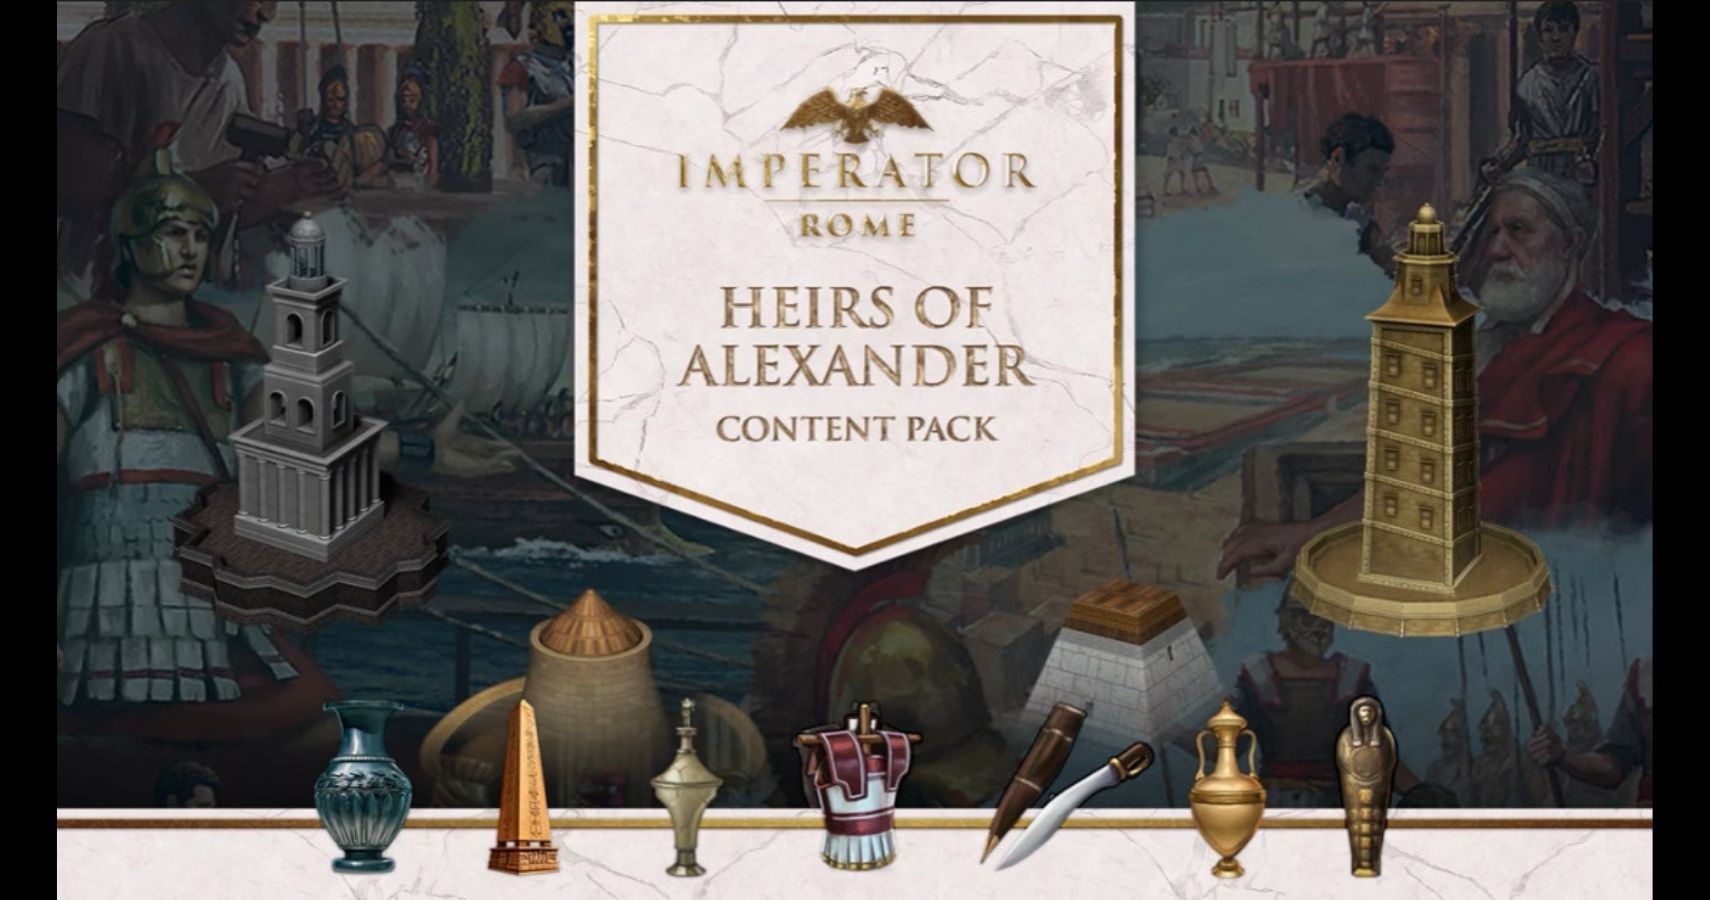 Imperator Rome Heirs of Alexander Content Pack feature image